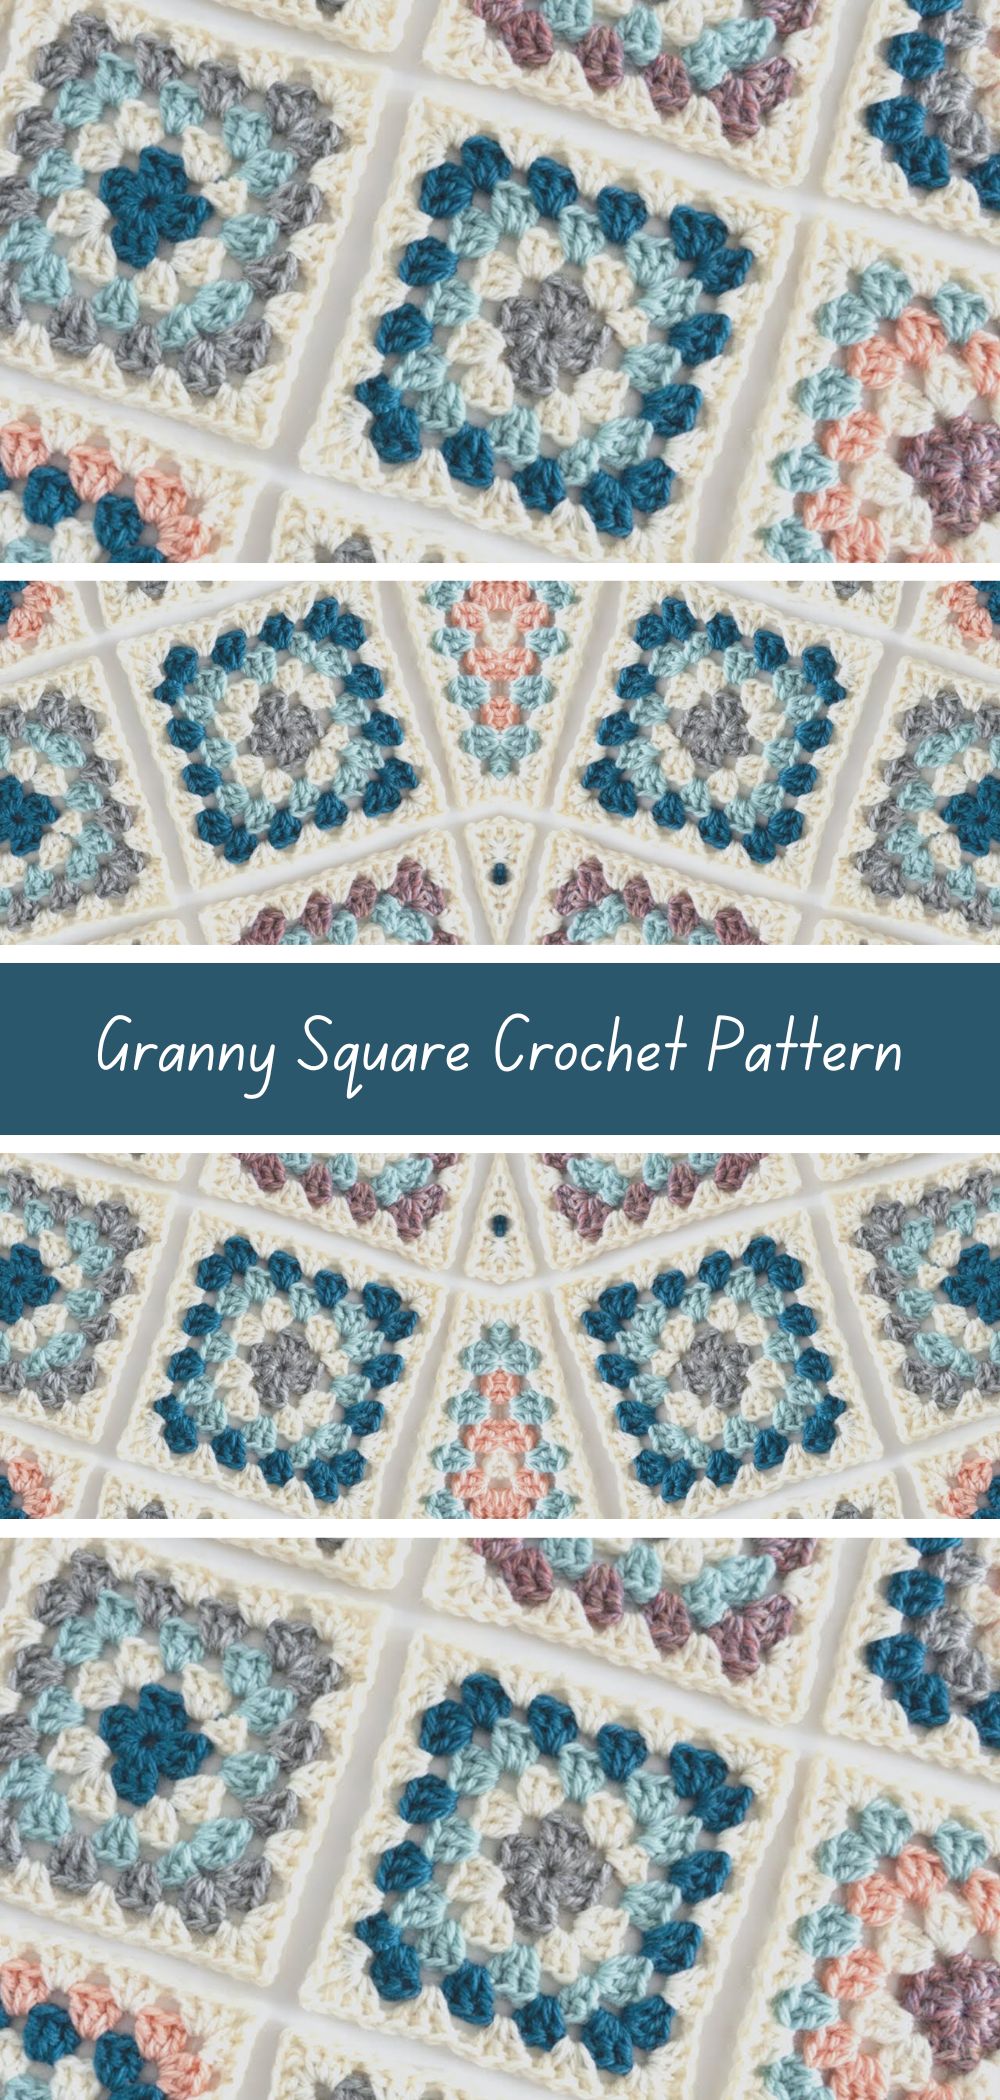 Easy Granny Square Crochet Pattern - Beginner-friendly guide to creating classic crochet squares